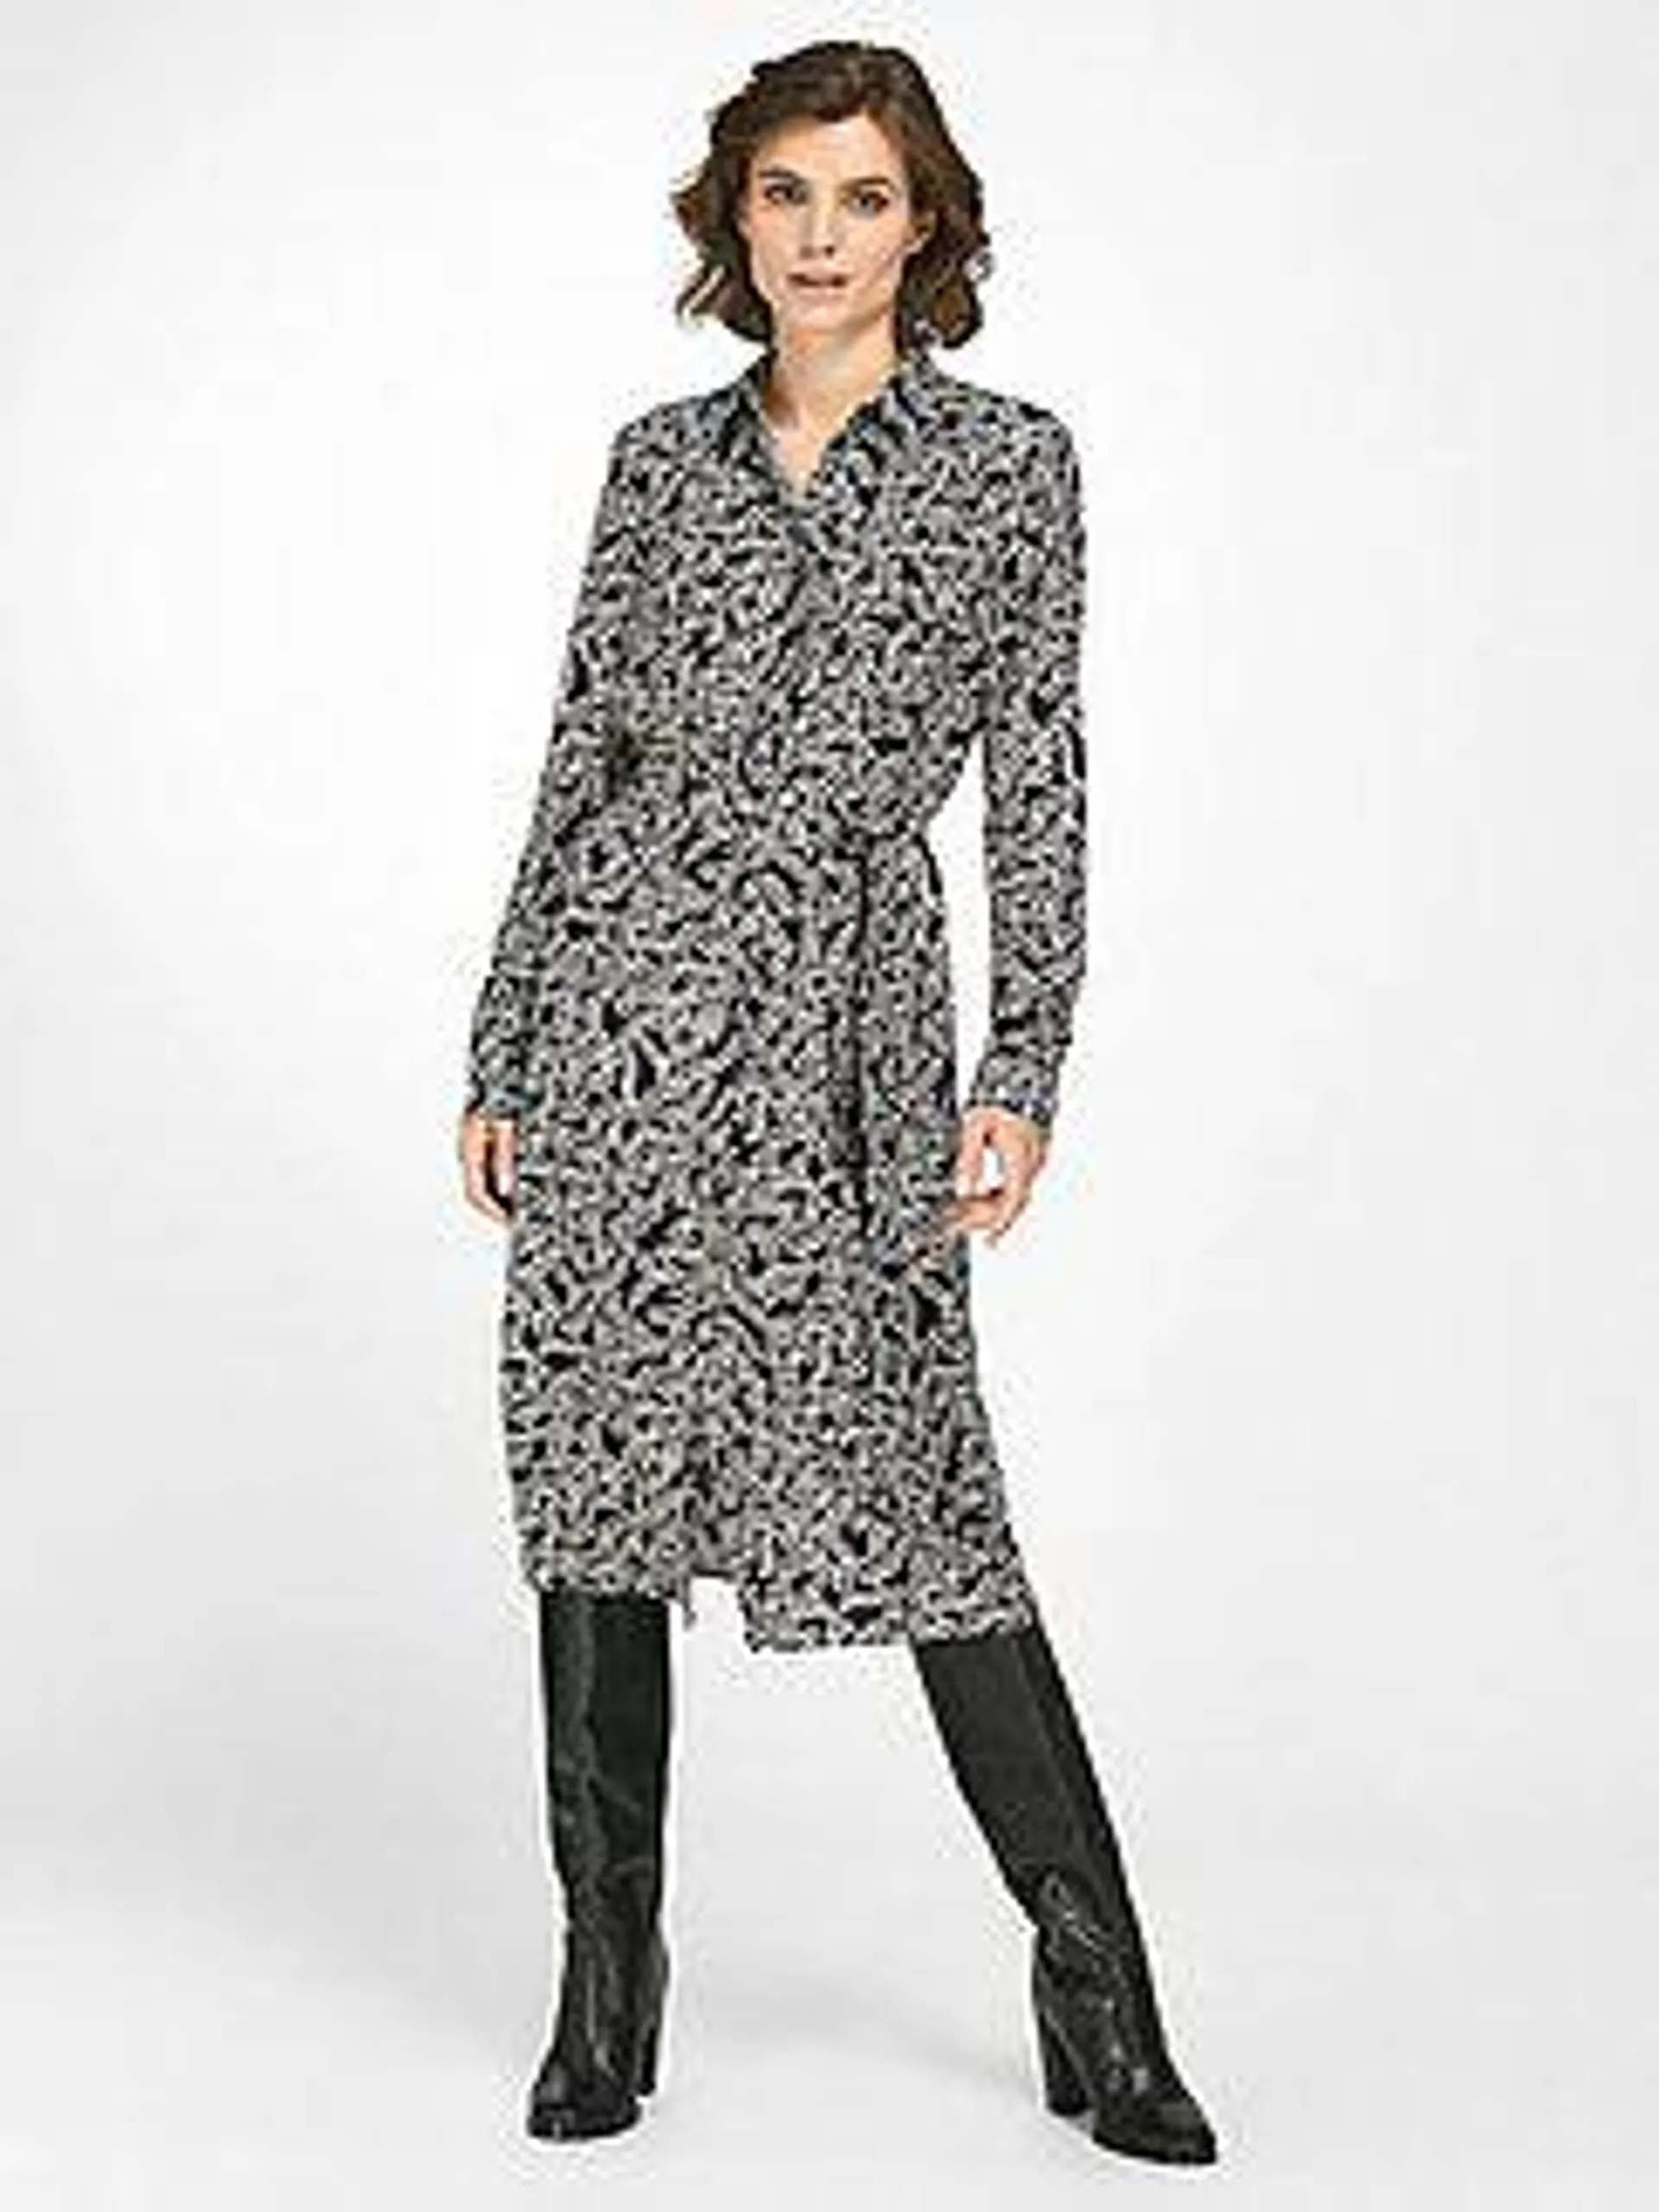 Shirt dress with long sleeves